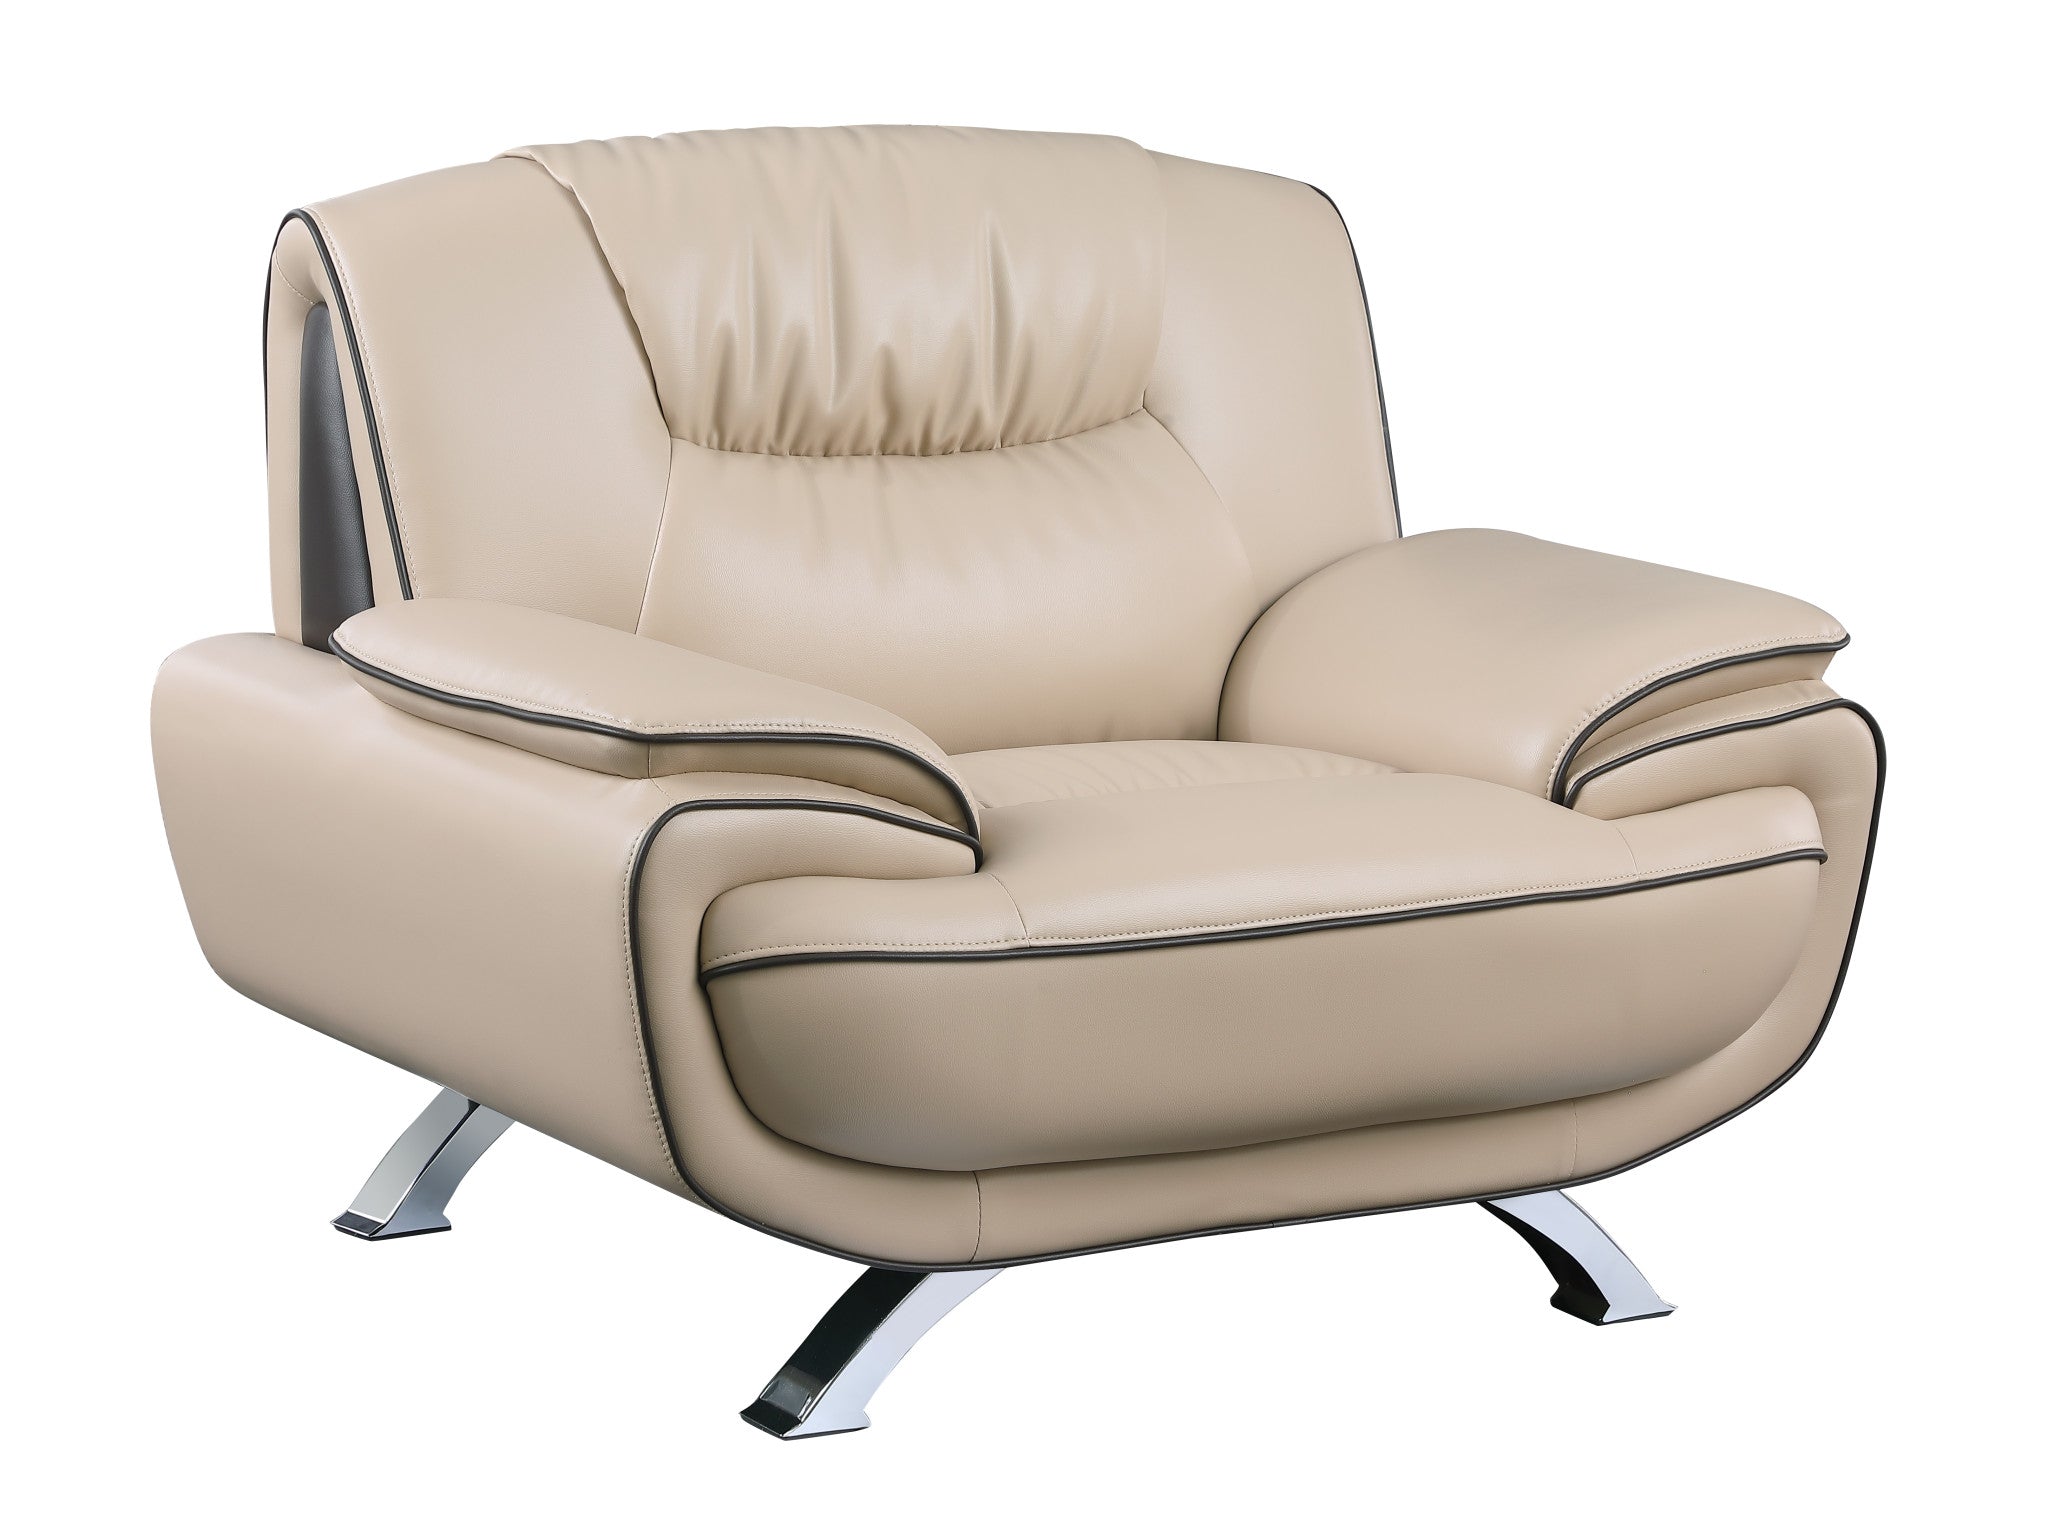 47" Beige and Silver Leather Match Arm Chair